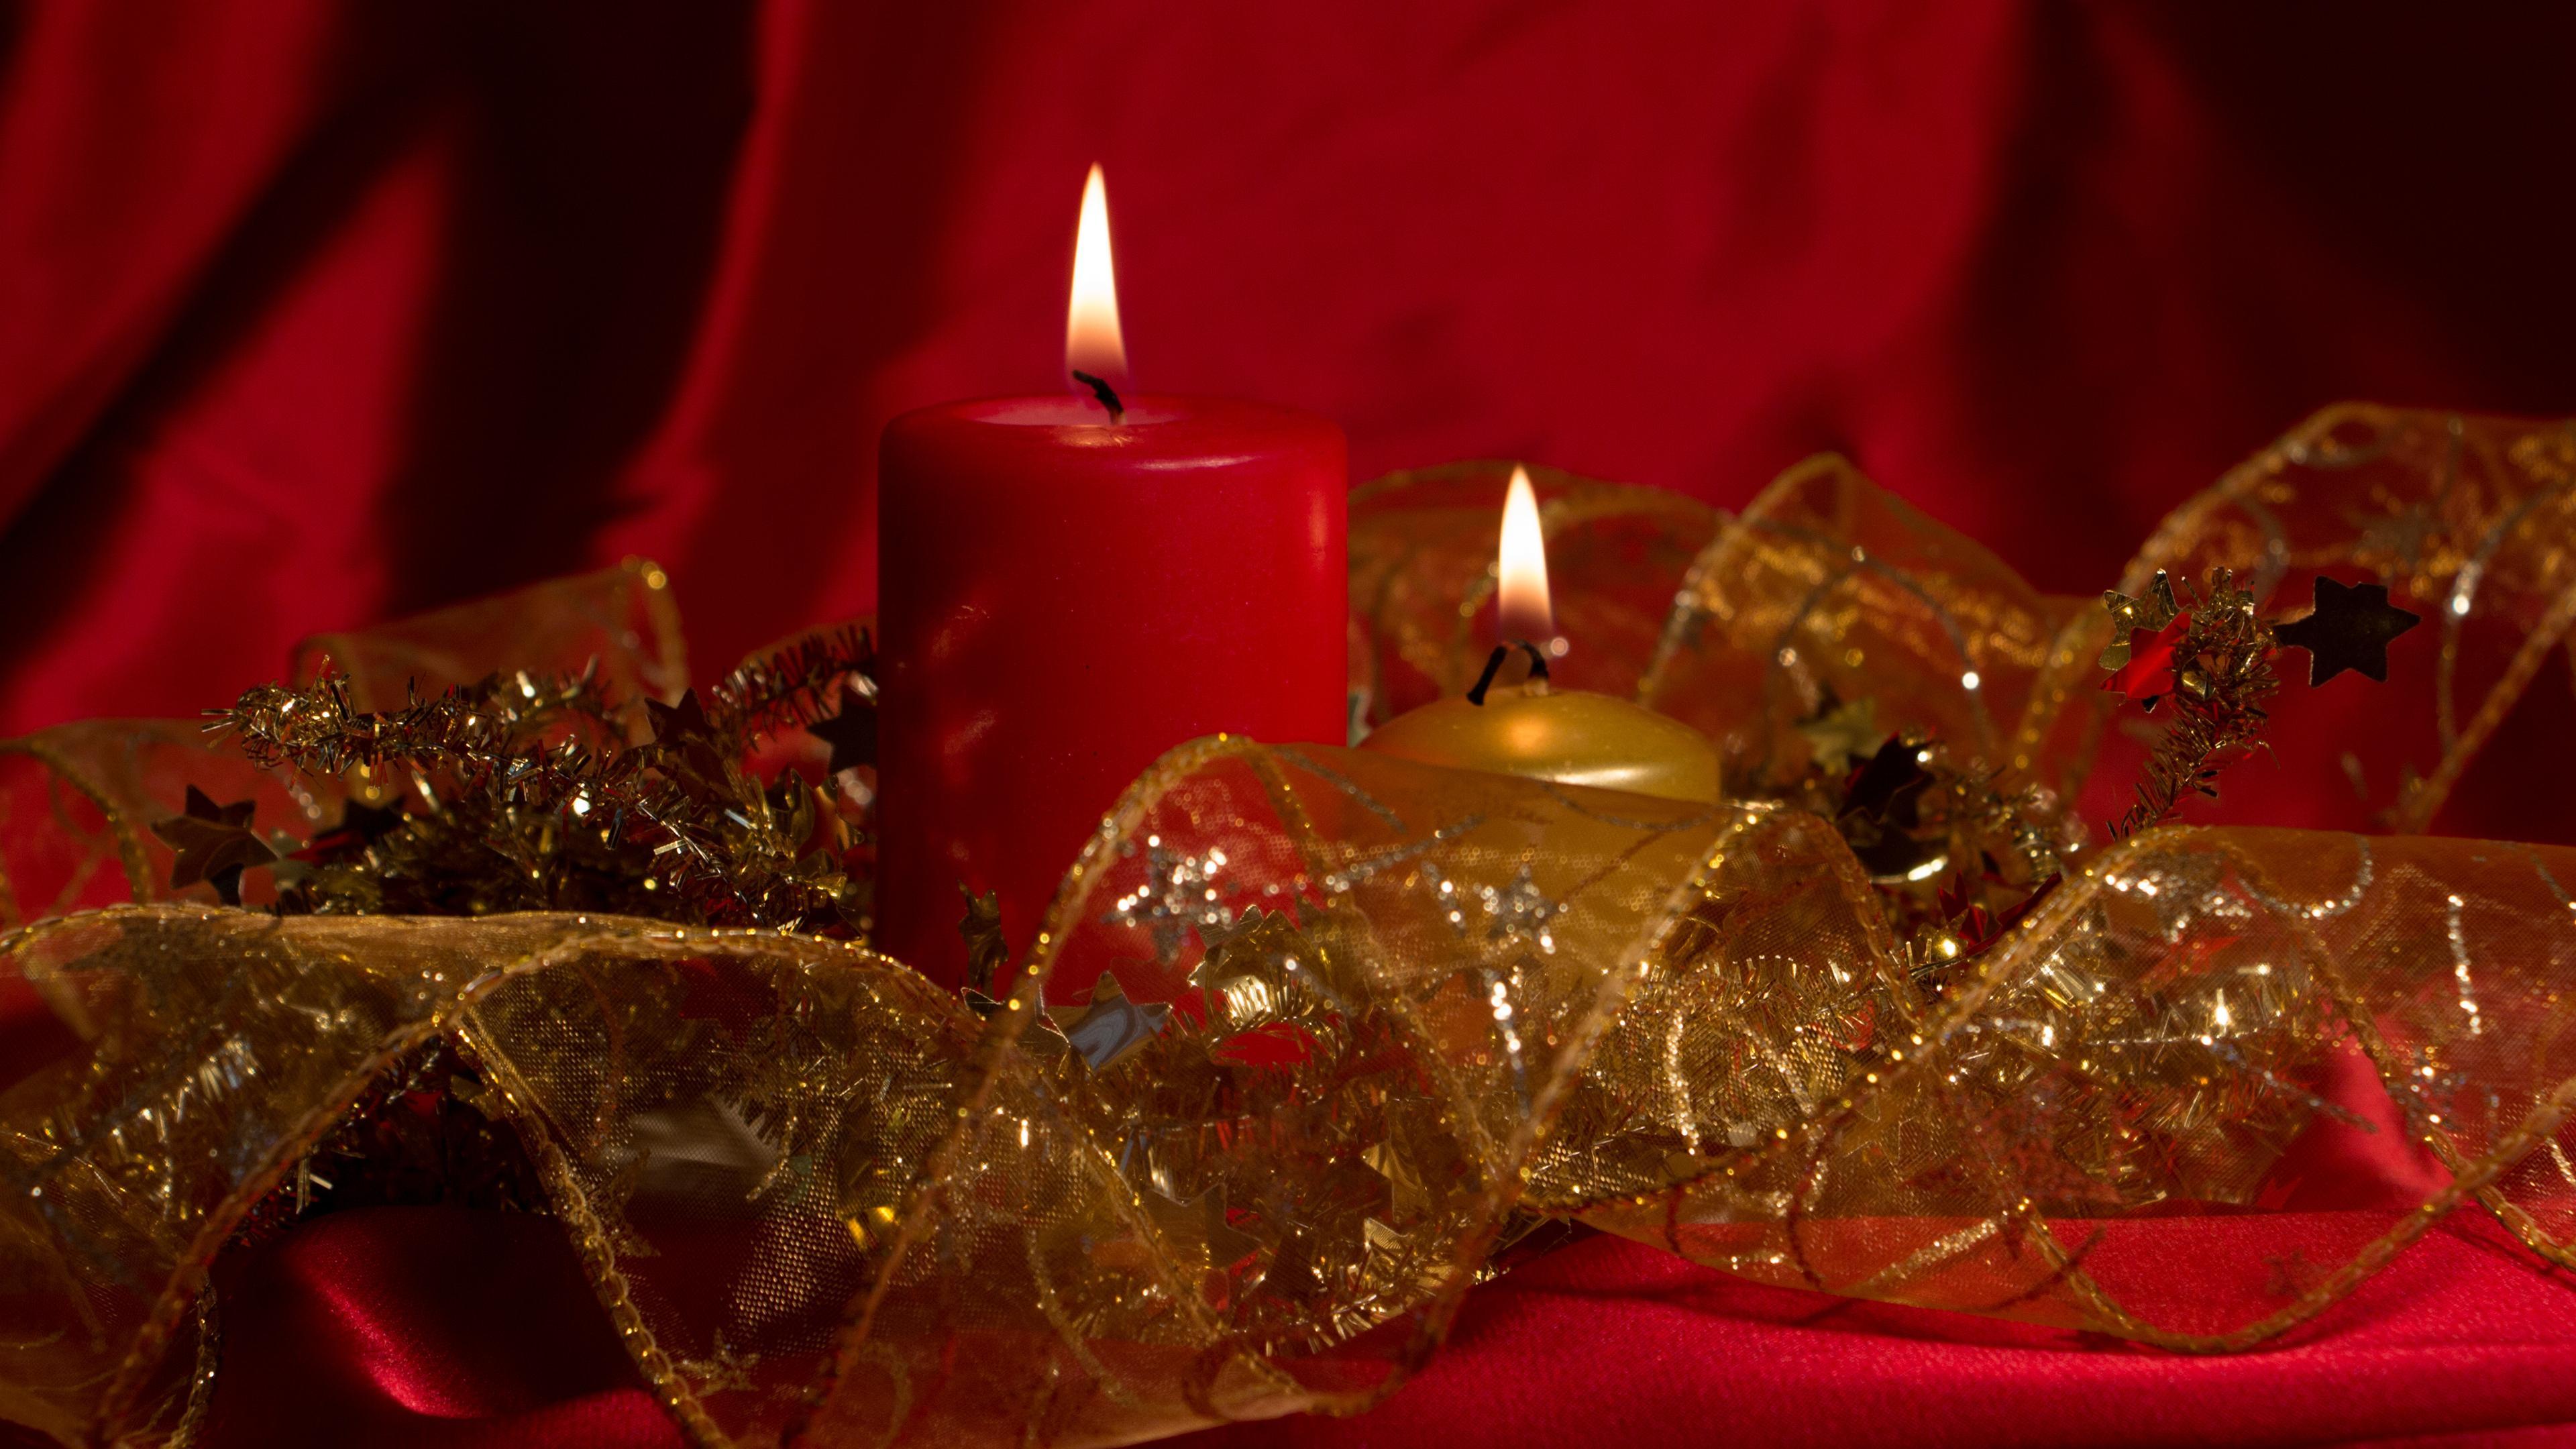 HD Red and golden Christmas candles Wallpaper. Download